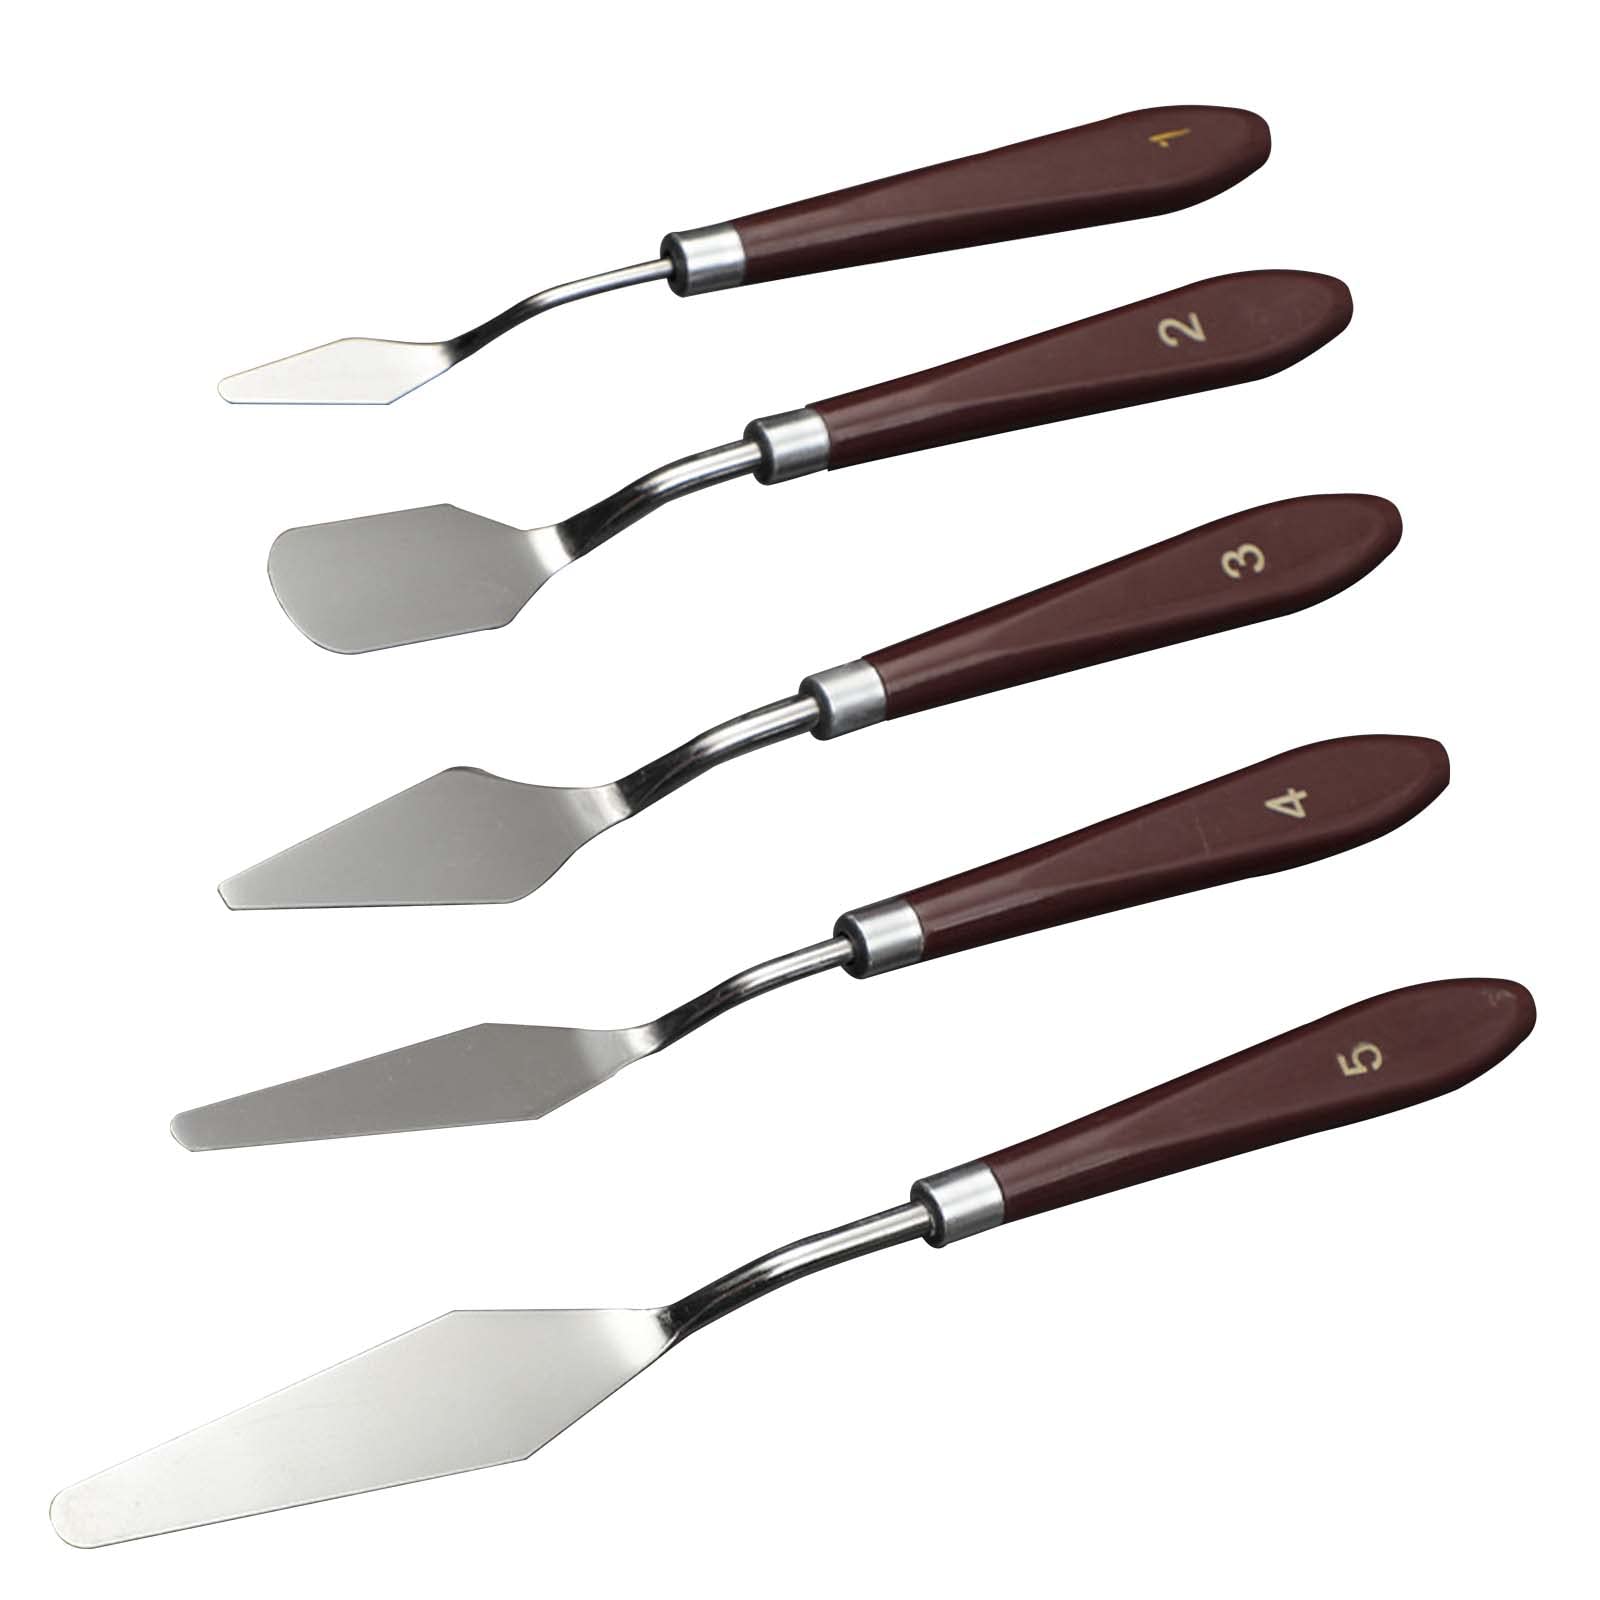 5 PCS Painting Knives Stainless Steel Spatula Palette Knife Oil